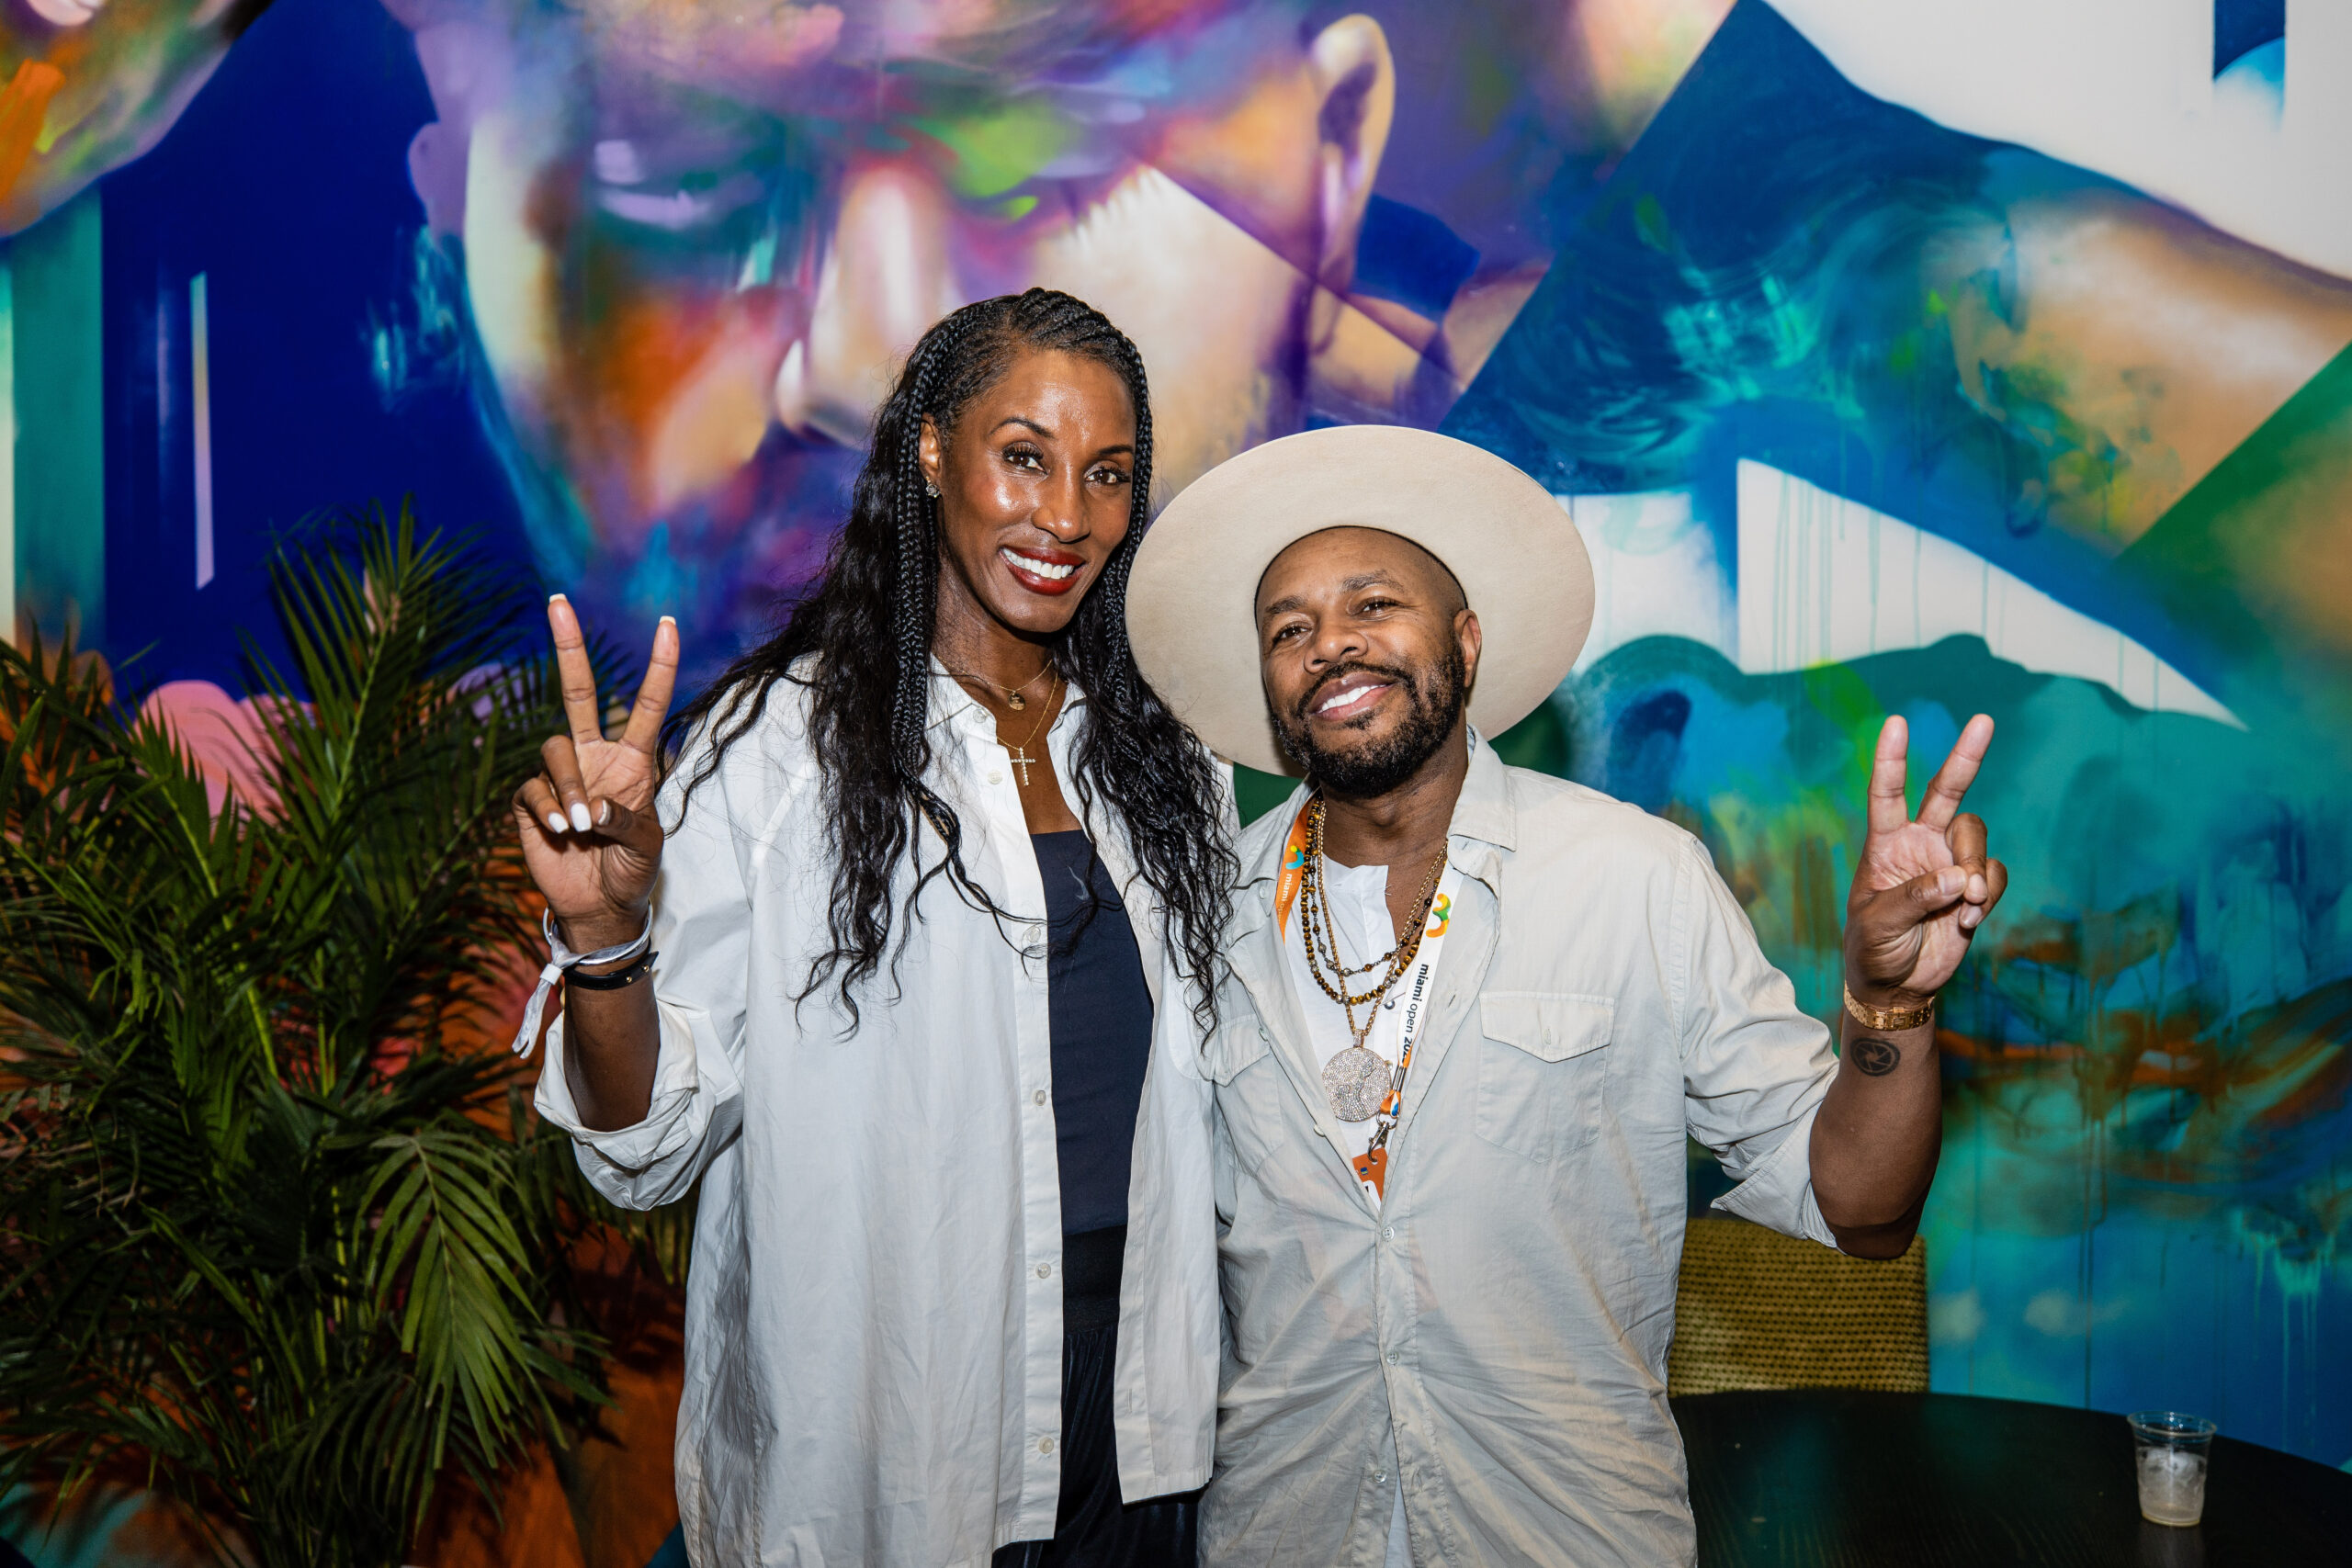 Lisa Leslie and Dj D-Nice at the 2023 Miami Open in Miami Gardens, Florida.